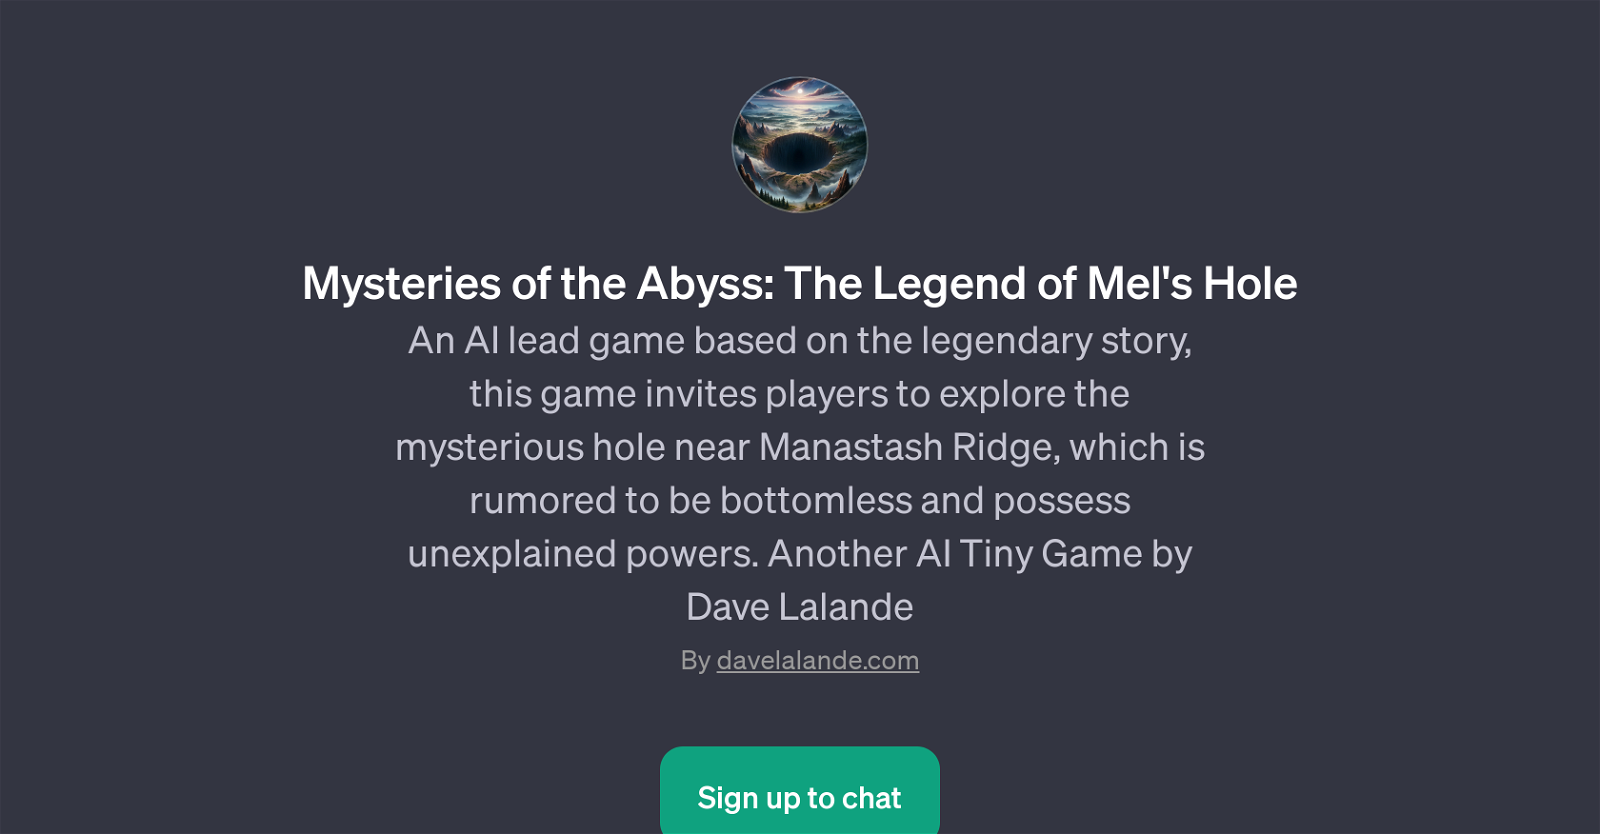 Mysteries of the Abyss: The Legend of Mel's Hole website